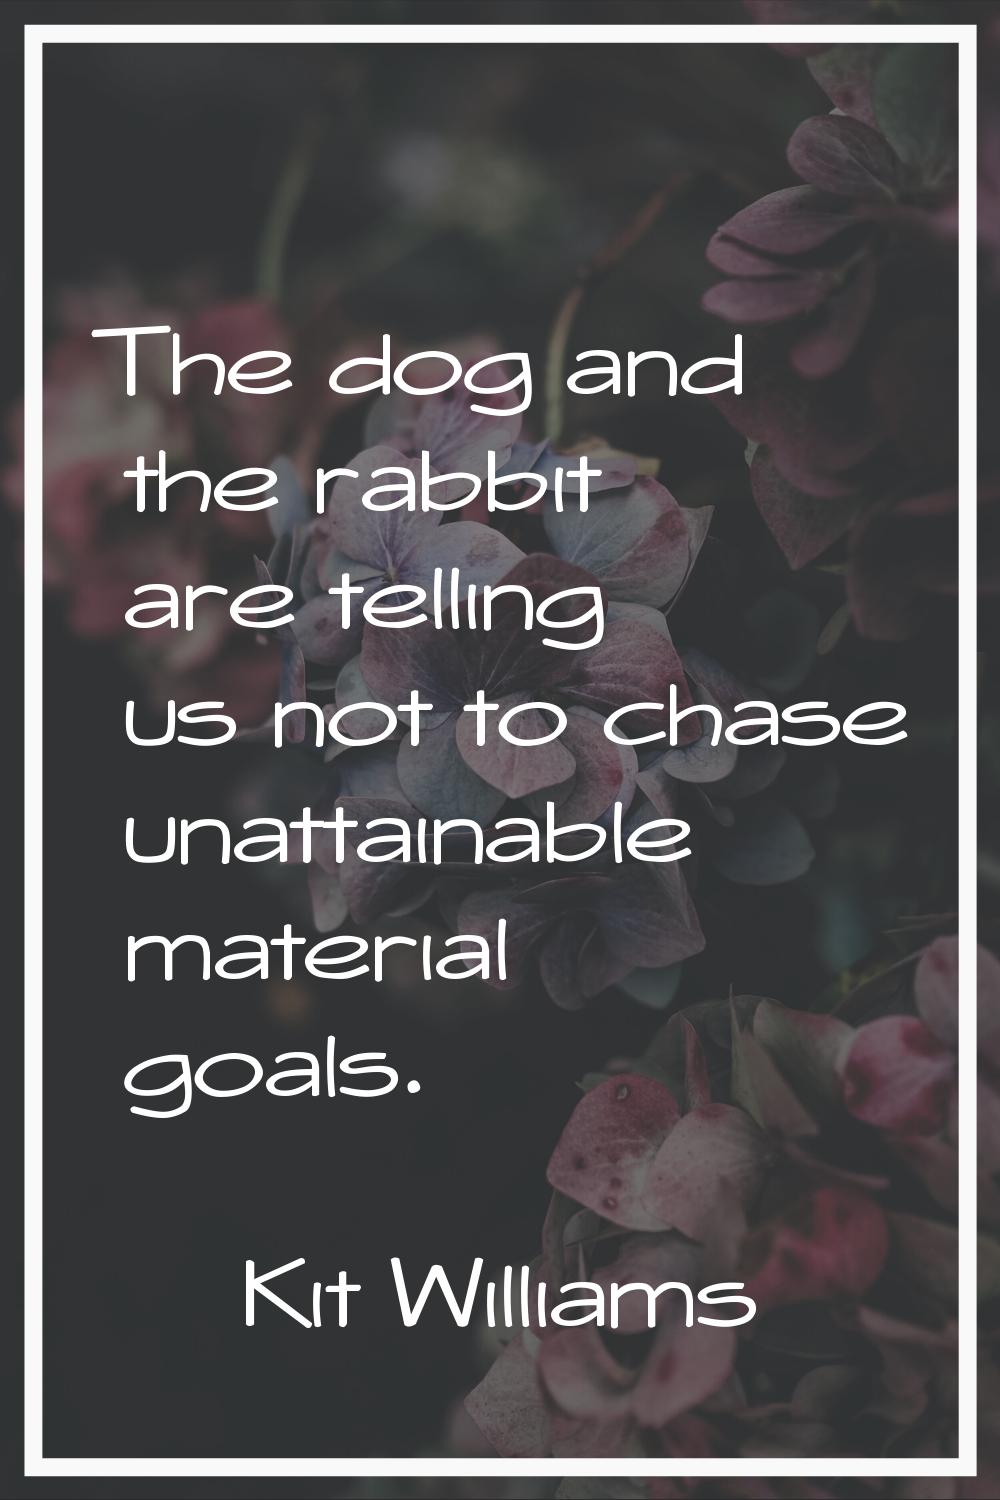 The dog and the rabbit are telling us not to chase unattainable material goals.